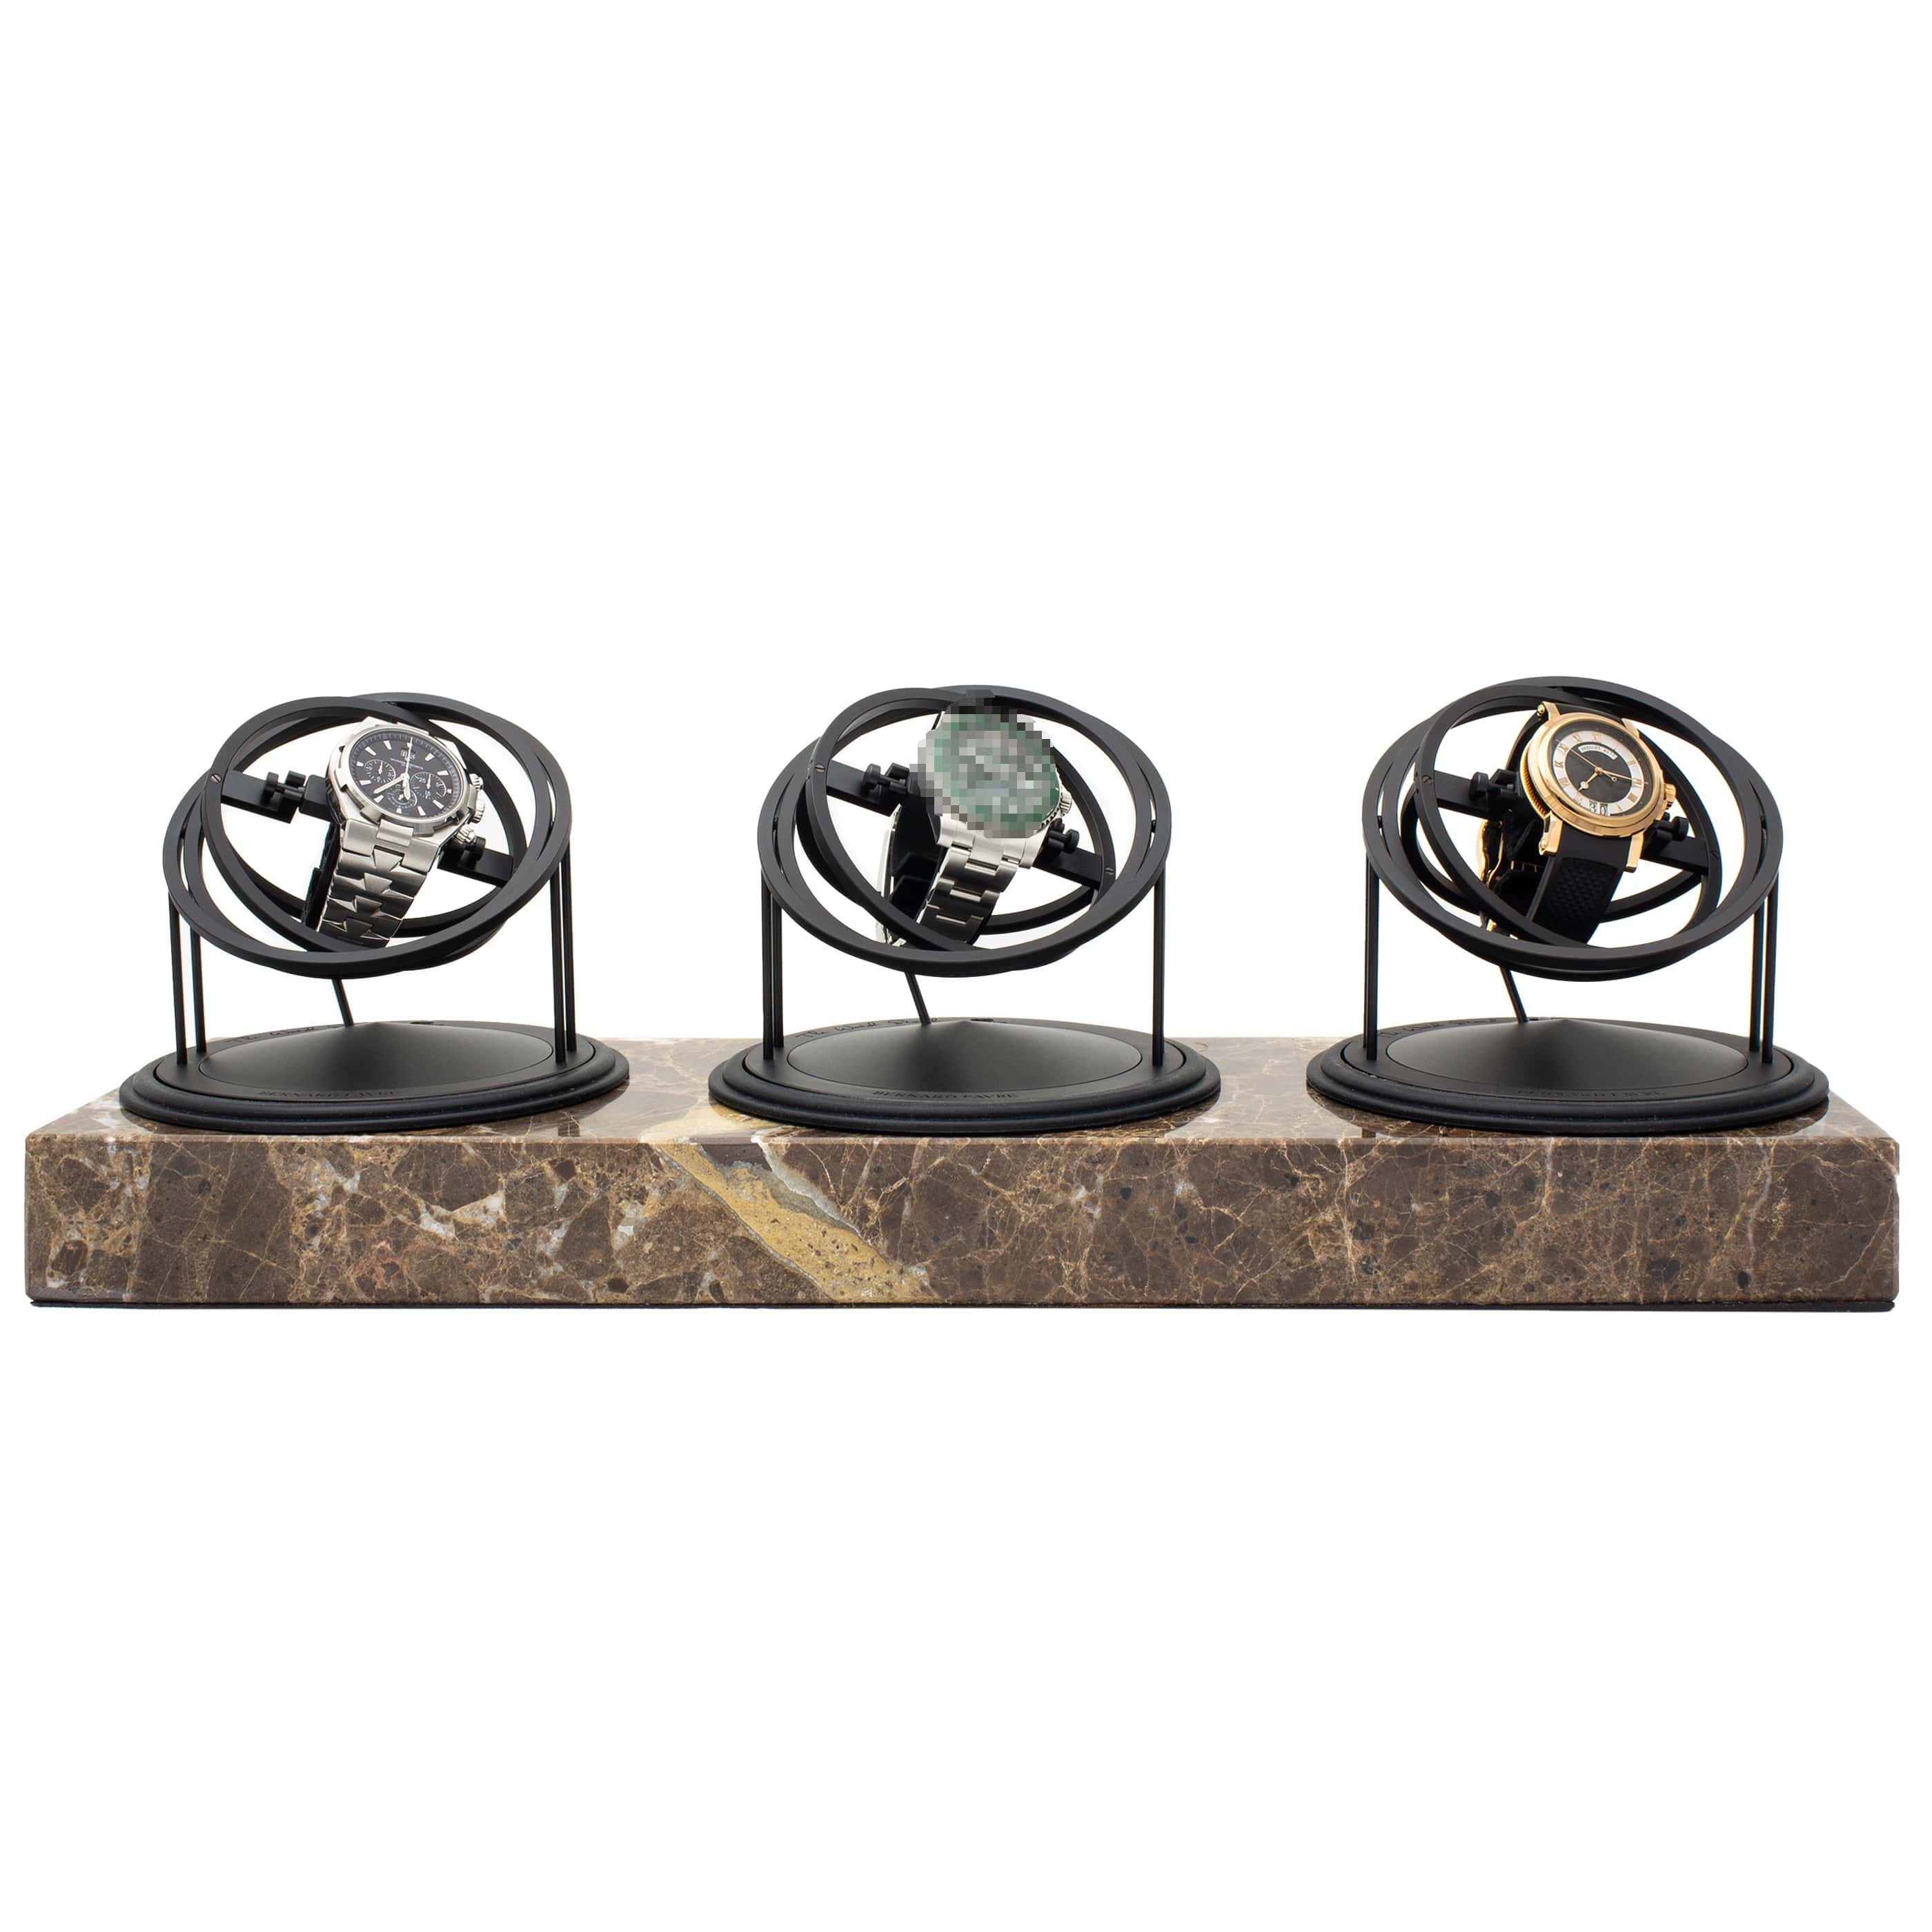 WATCH WINDER - THREE PLANET DOUBLE AXIS - BROWN